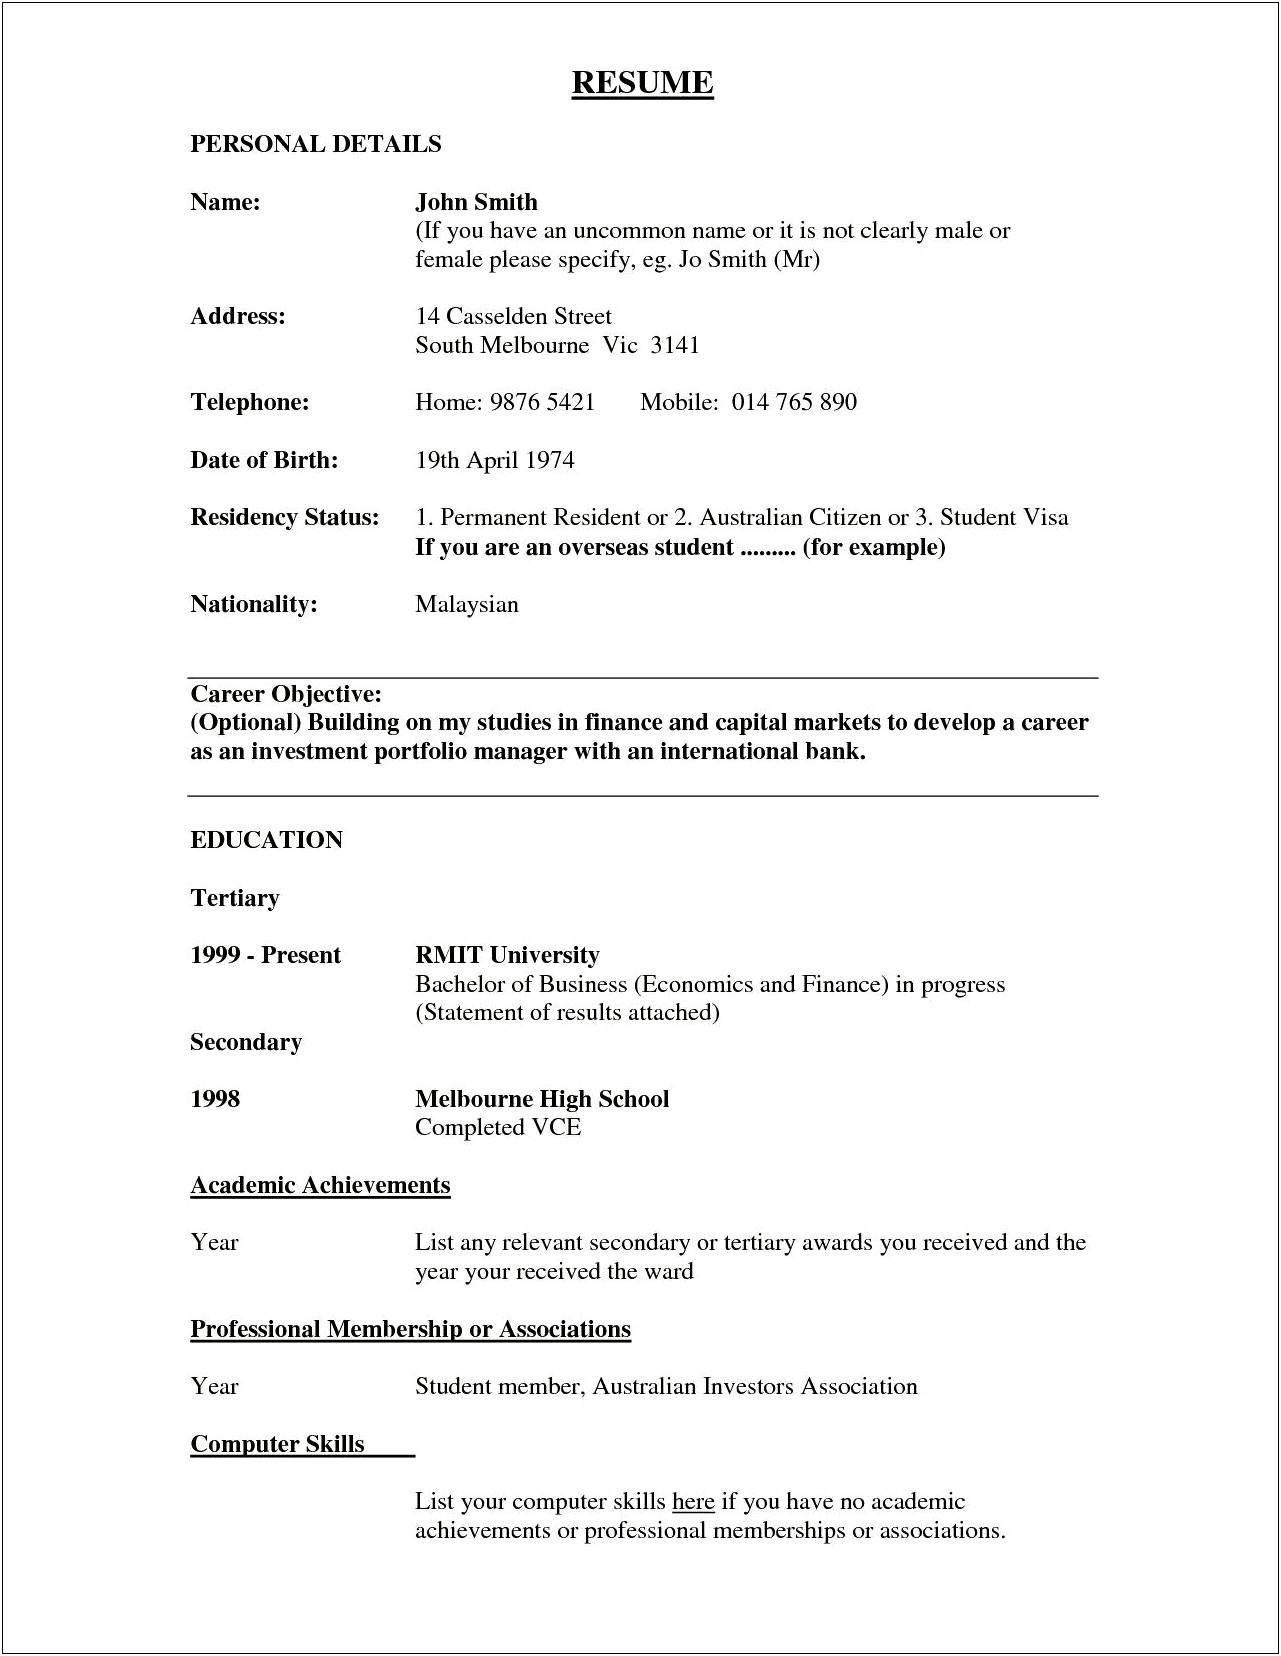 Bank Teller Resume Example Objectives